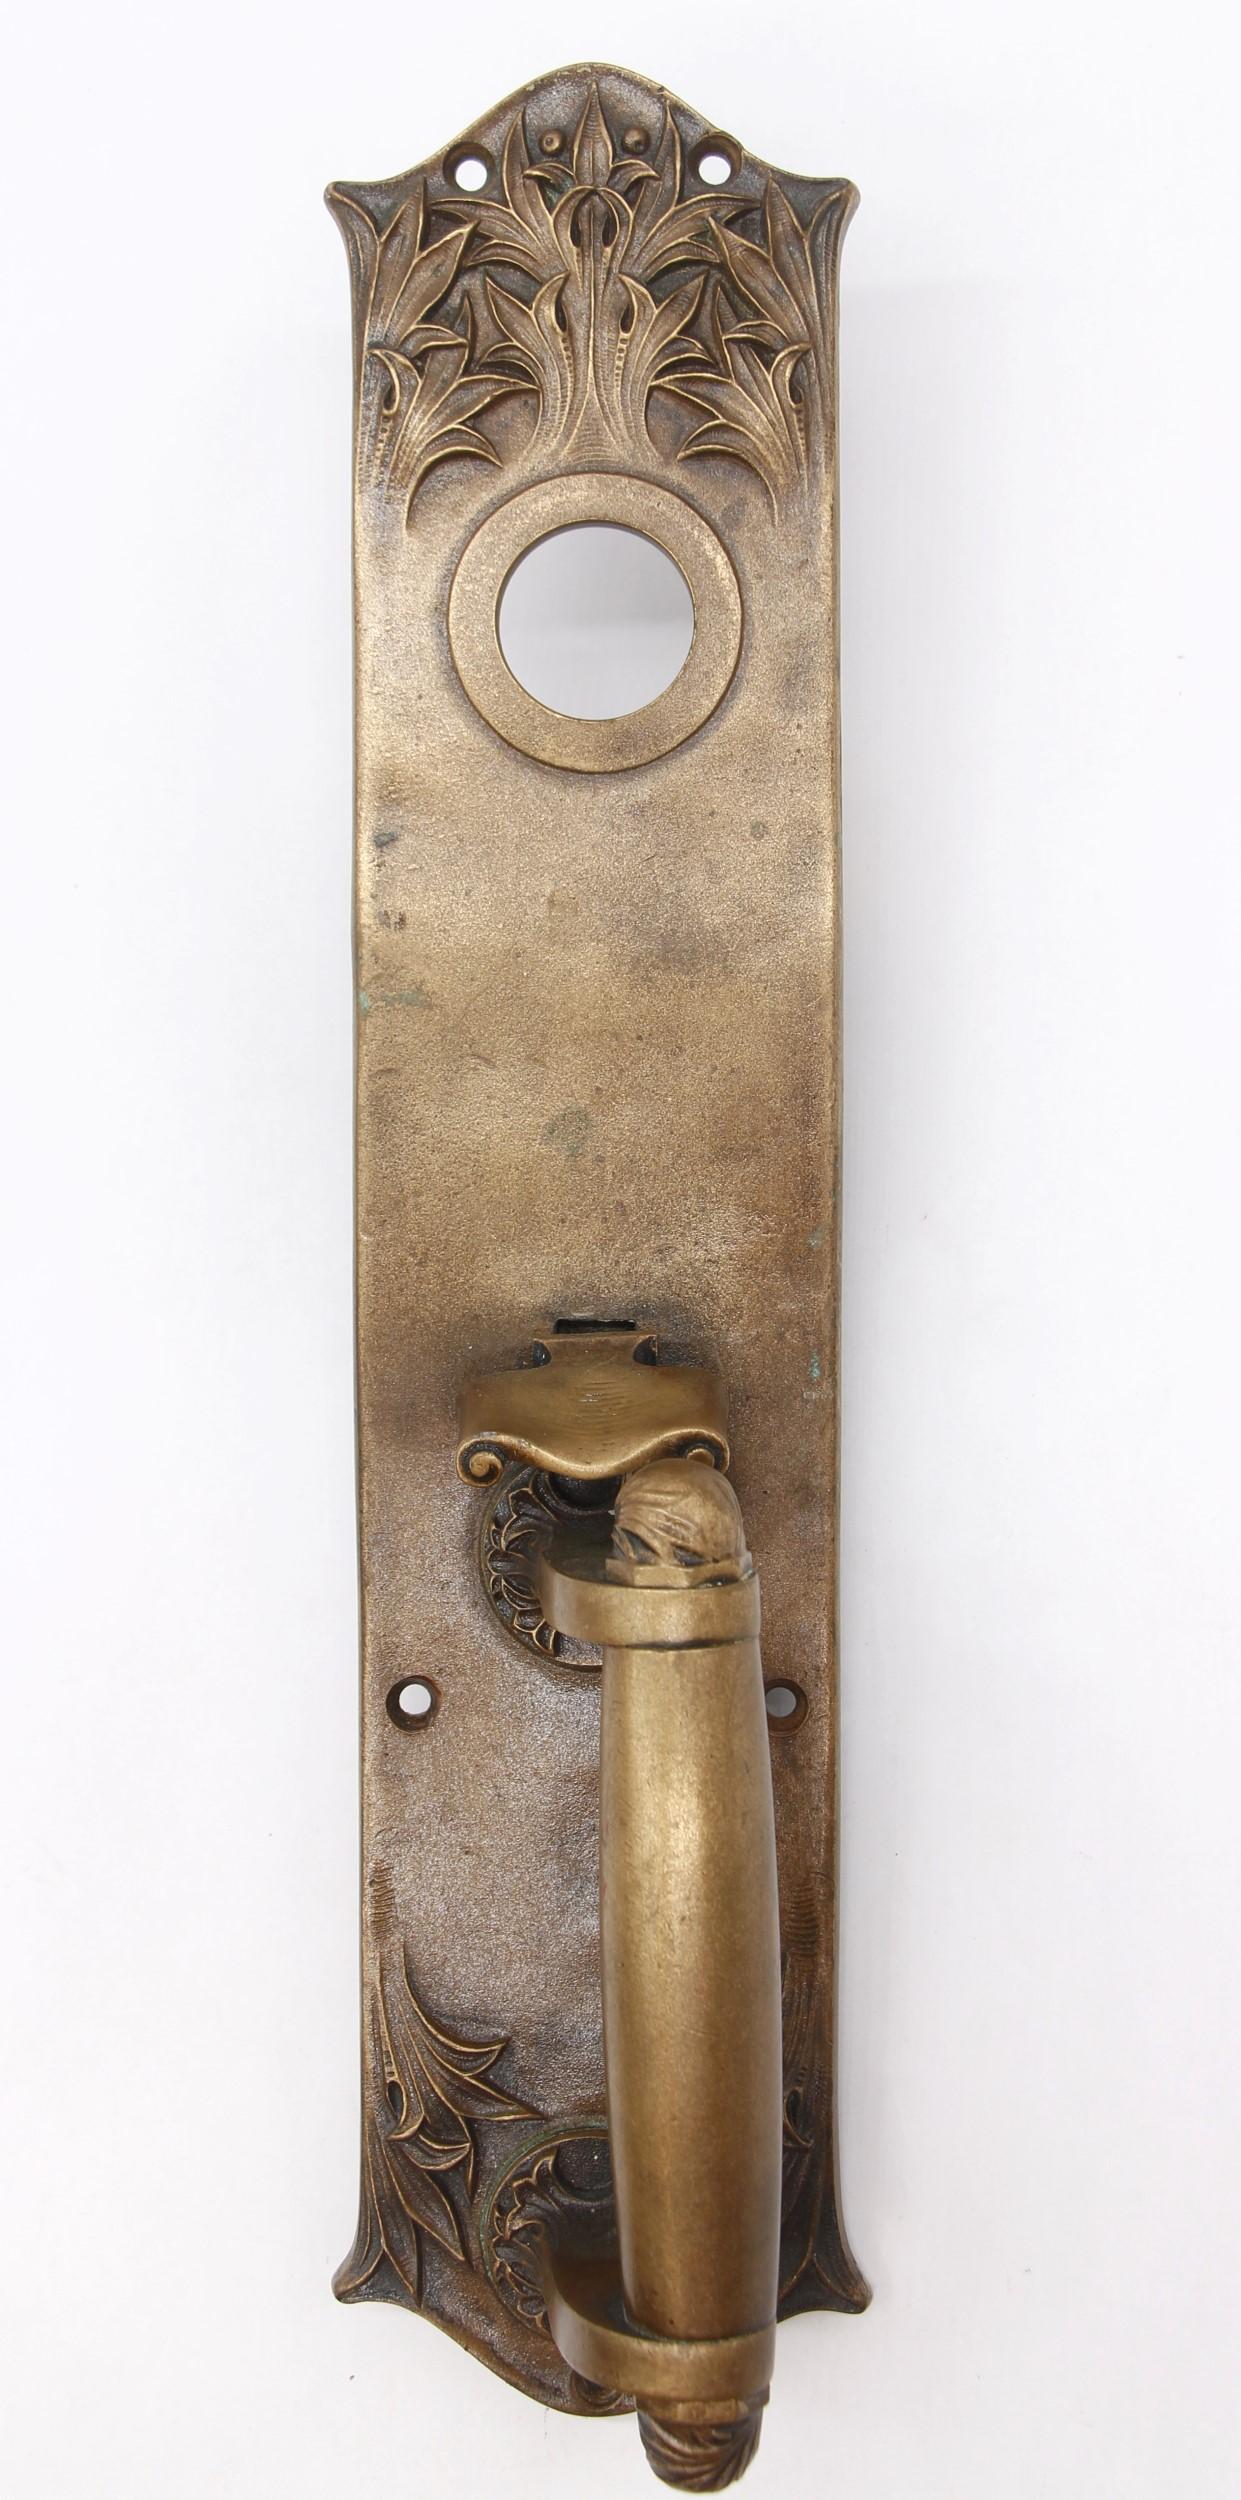 This is an antique 14.8 inch bronze door pull with a cylinder lock insert and thumb latch.  It was made by Yale & Towne in a Romanesque design called 